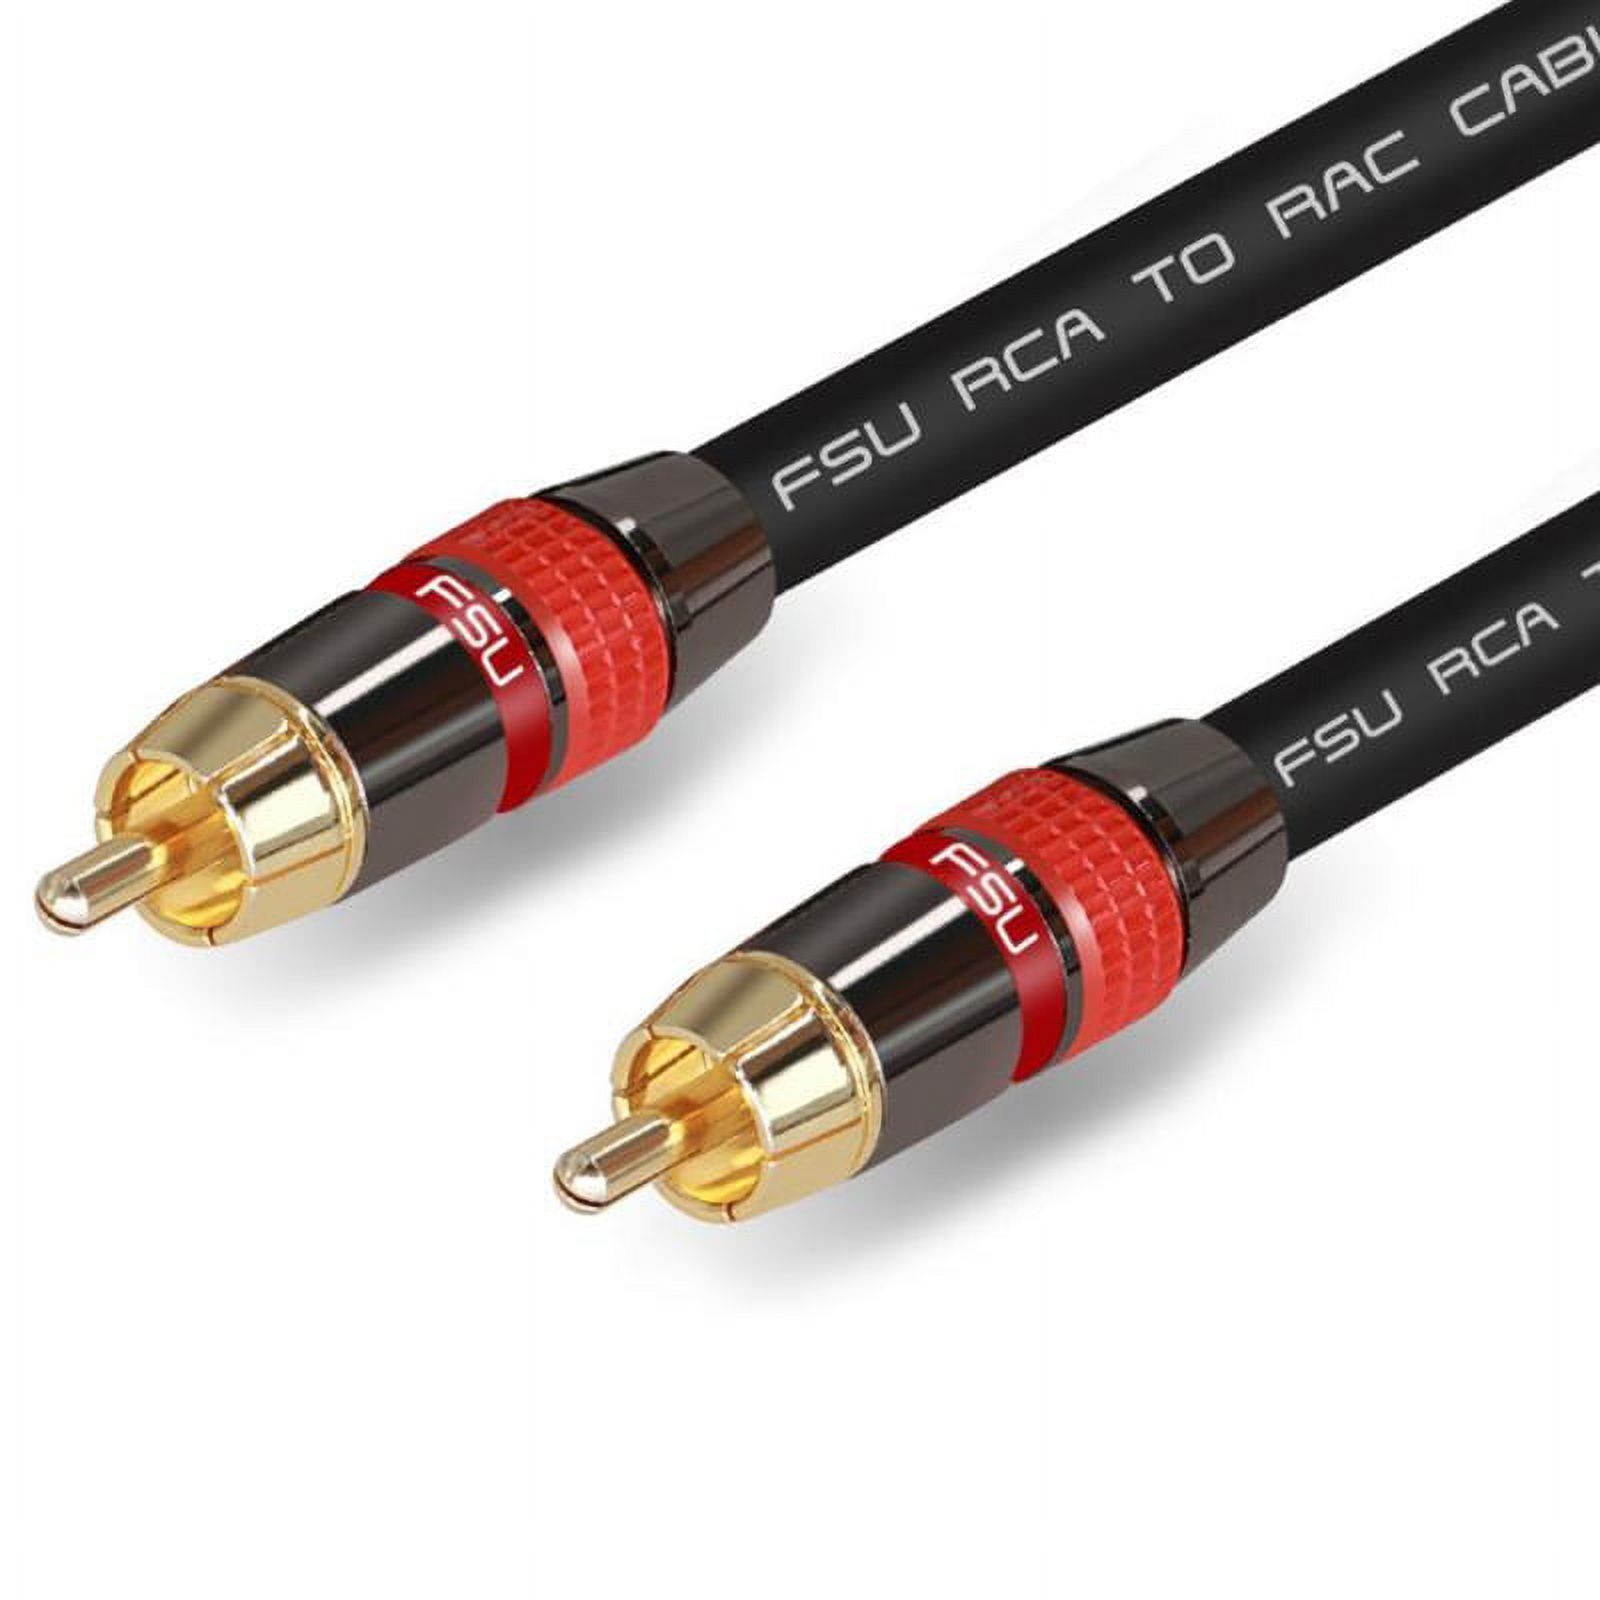 Digital Audio RCA Cable Premium Stereo RCA to RCA Coaxial SPDIF Cable Male Speaker Hifi Subwoofer Cable AV 2M - image 1 of 8